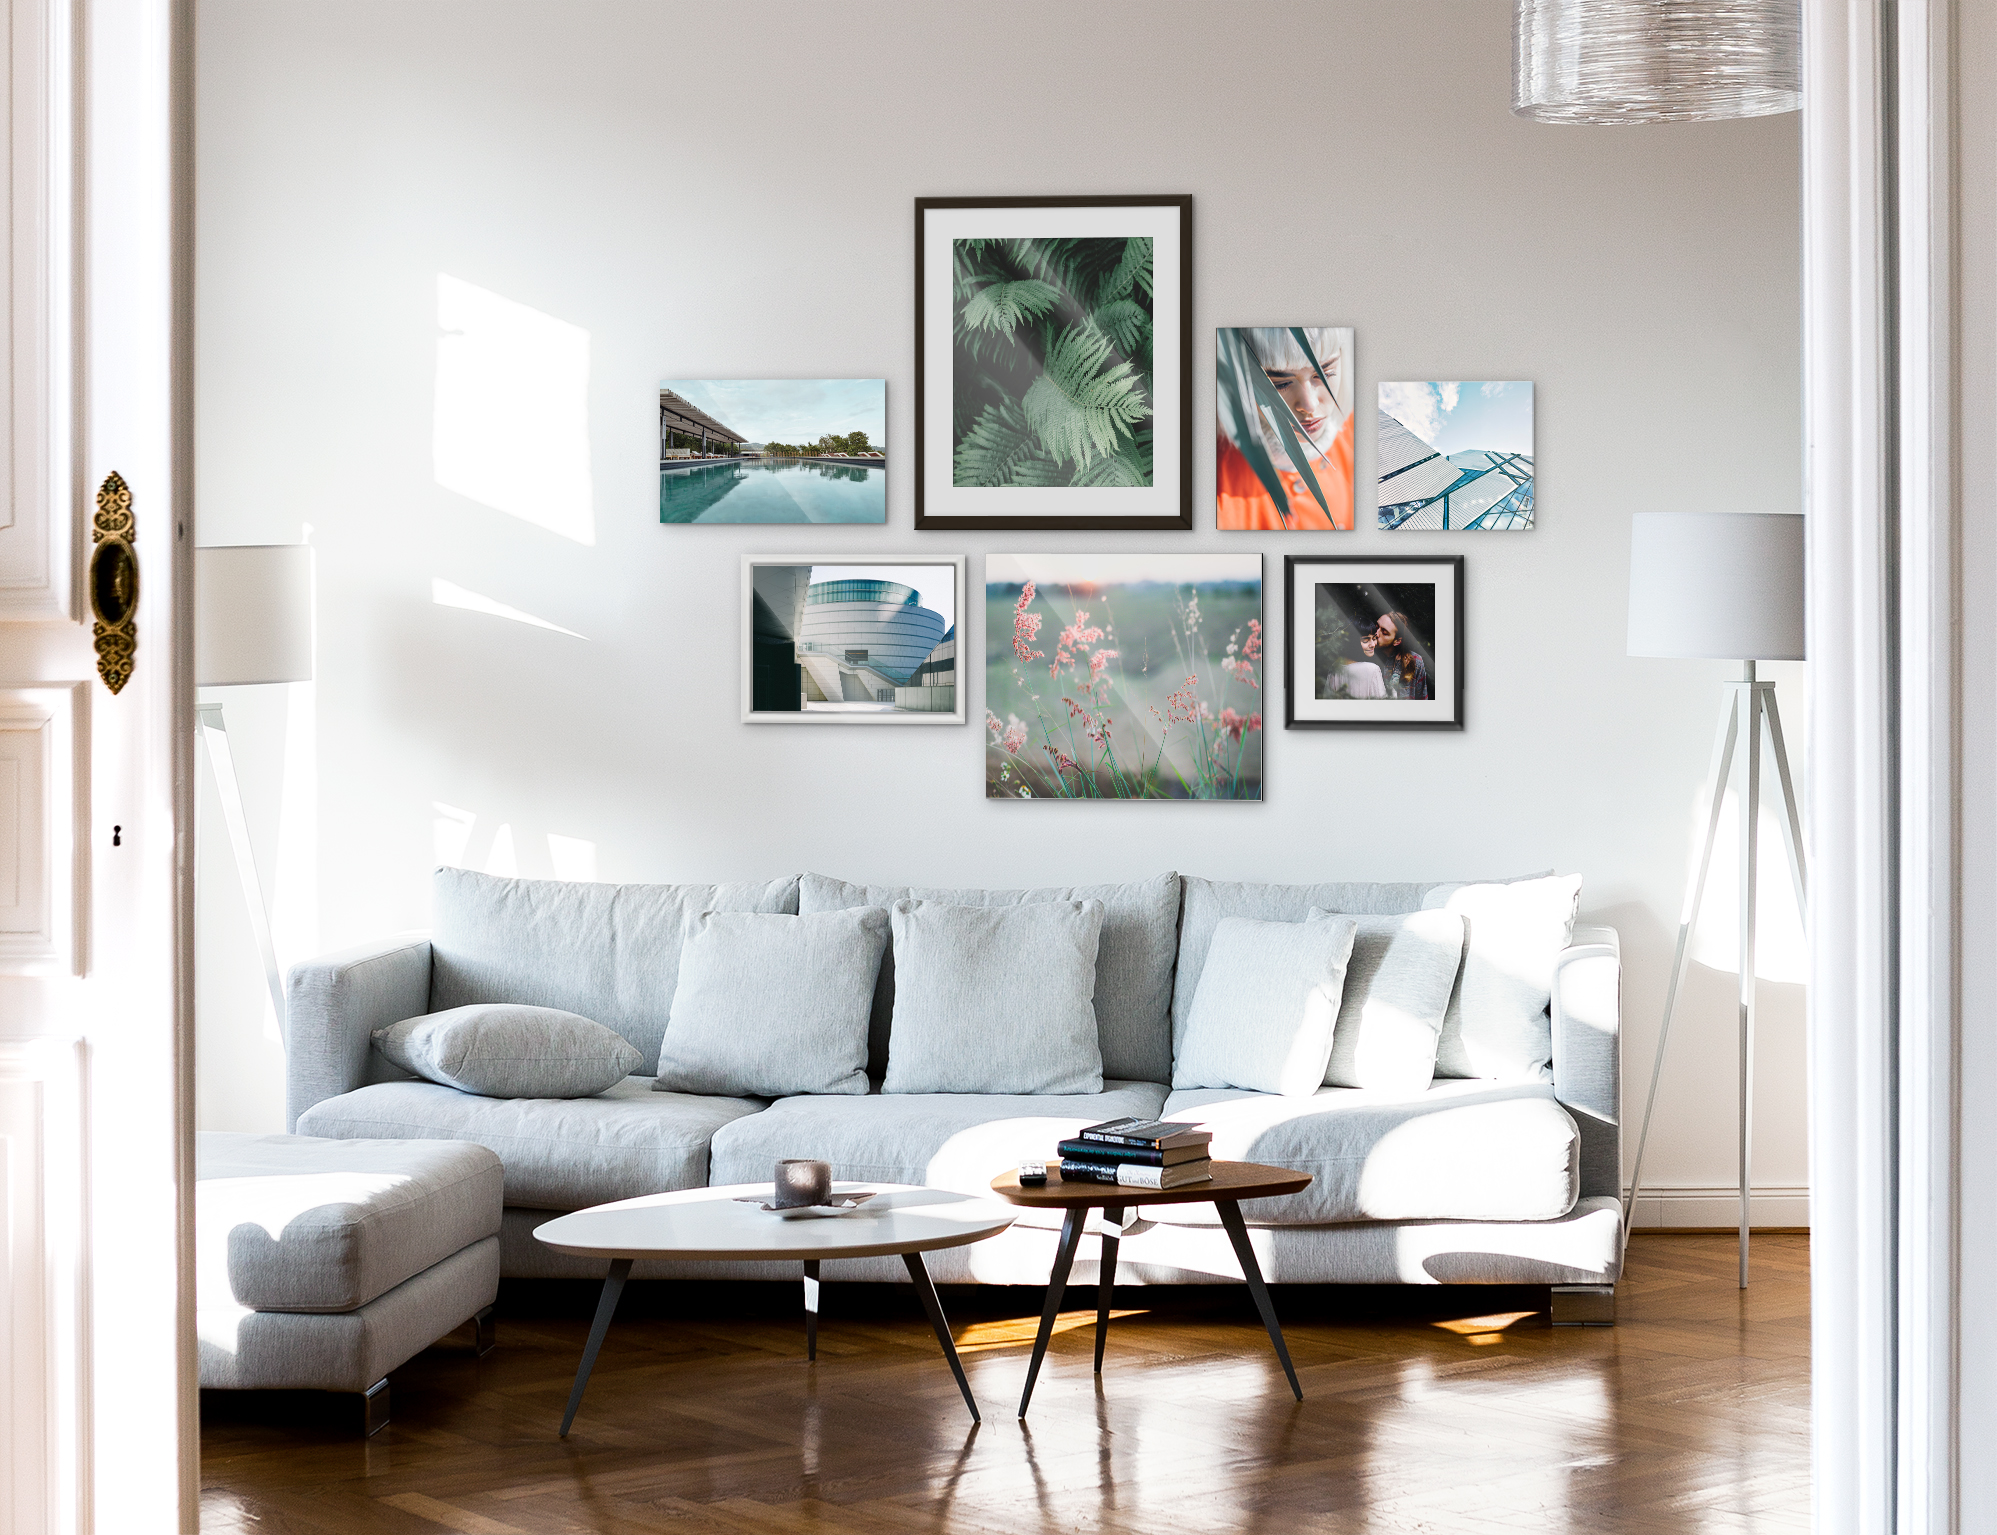 86% said they considered creating wall art with their favorite photos. Creating a gallery wall can be fun, easy, and a great way to enjoy and share your best photos every day.